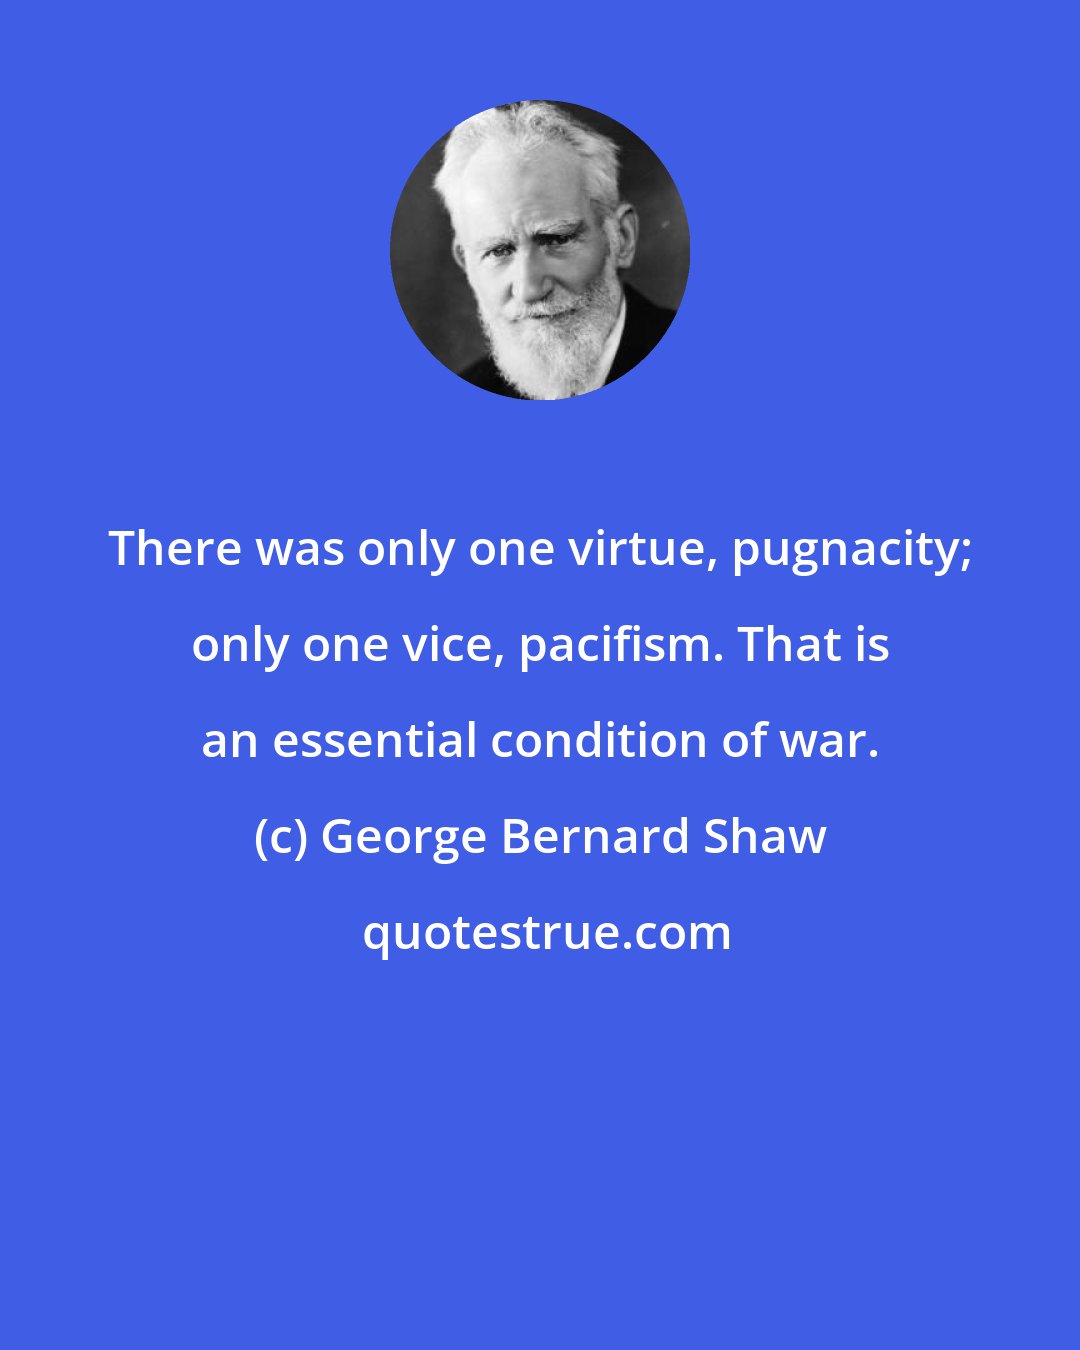 George Bernard Shaw: There was only one virtue, pugnacity; only one vice, pacifism. That is an essential condition of war.